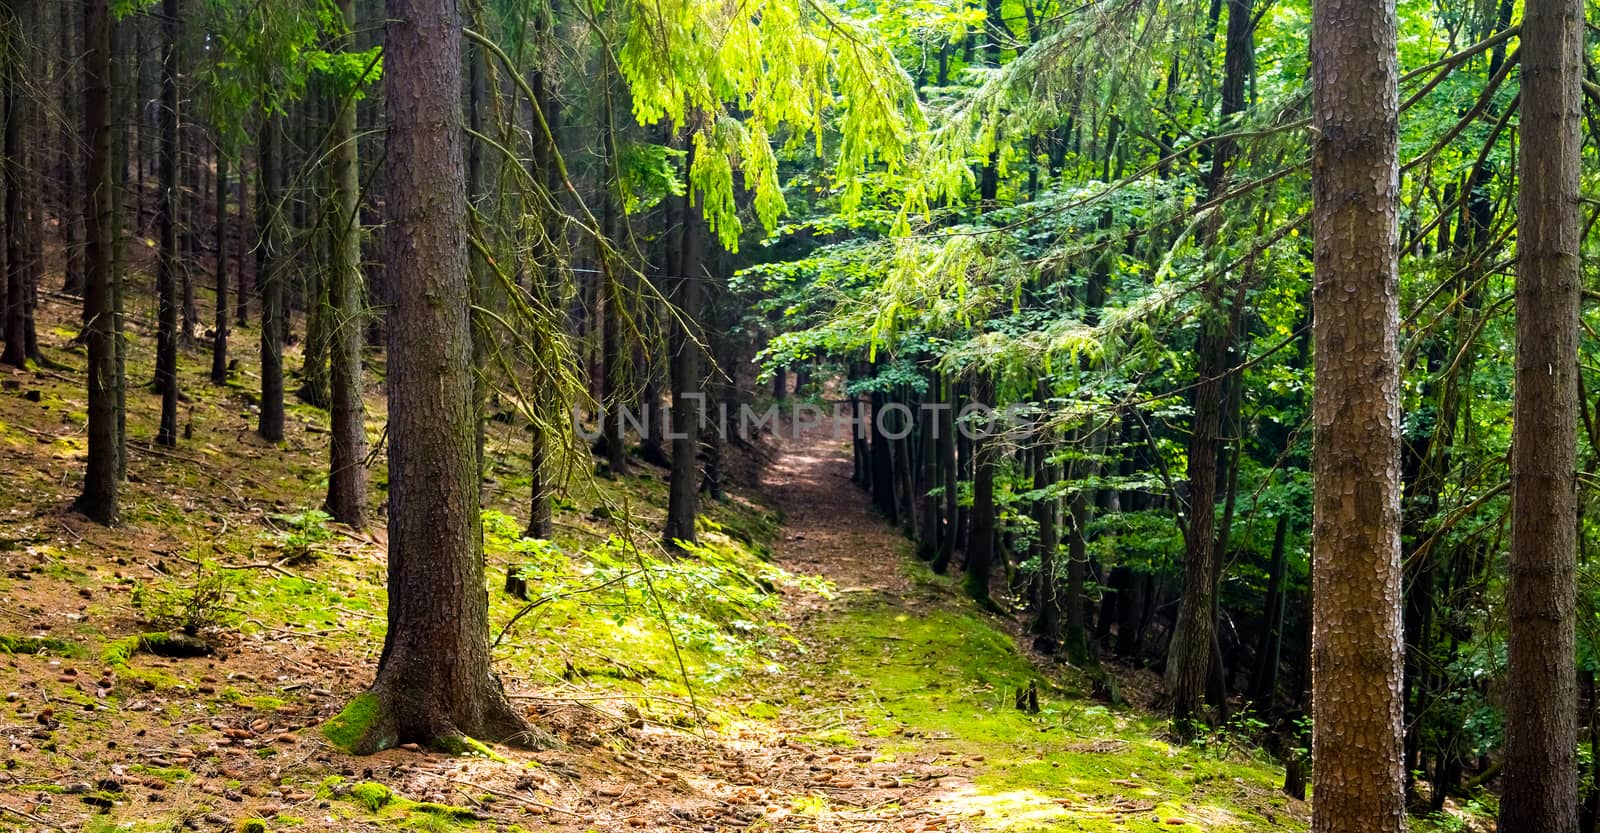 The spruce forest path with moss on ground